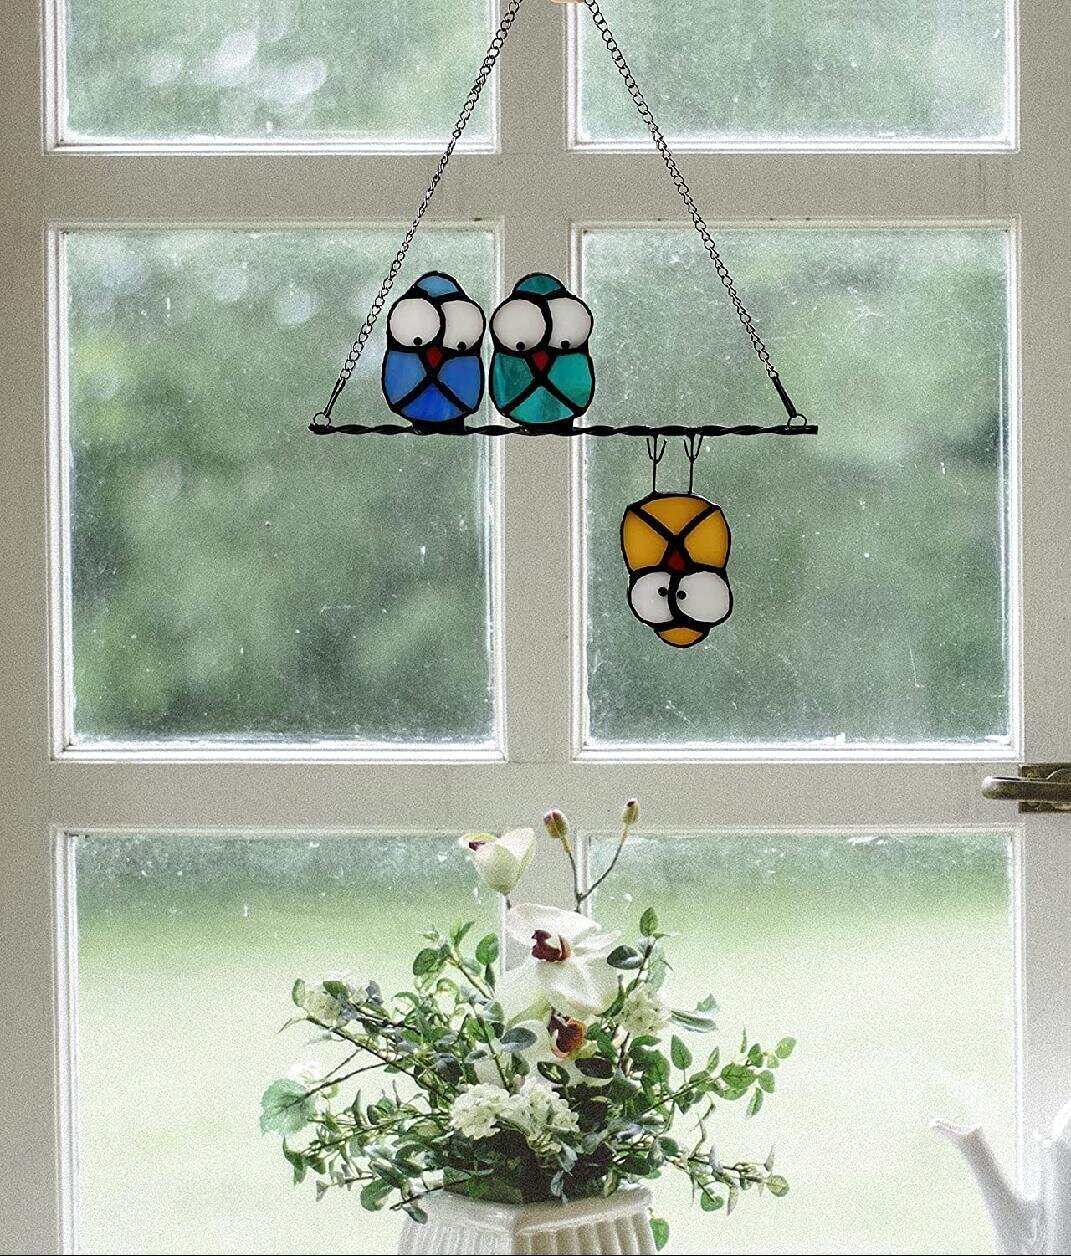 Stained Glass Birds-On-A-Wire Window Panel Hanging Suncatcher Ornament Gifts New 